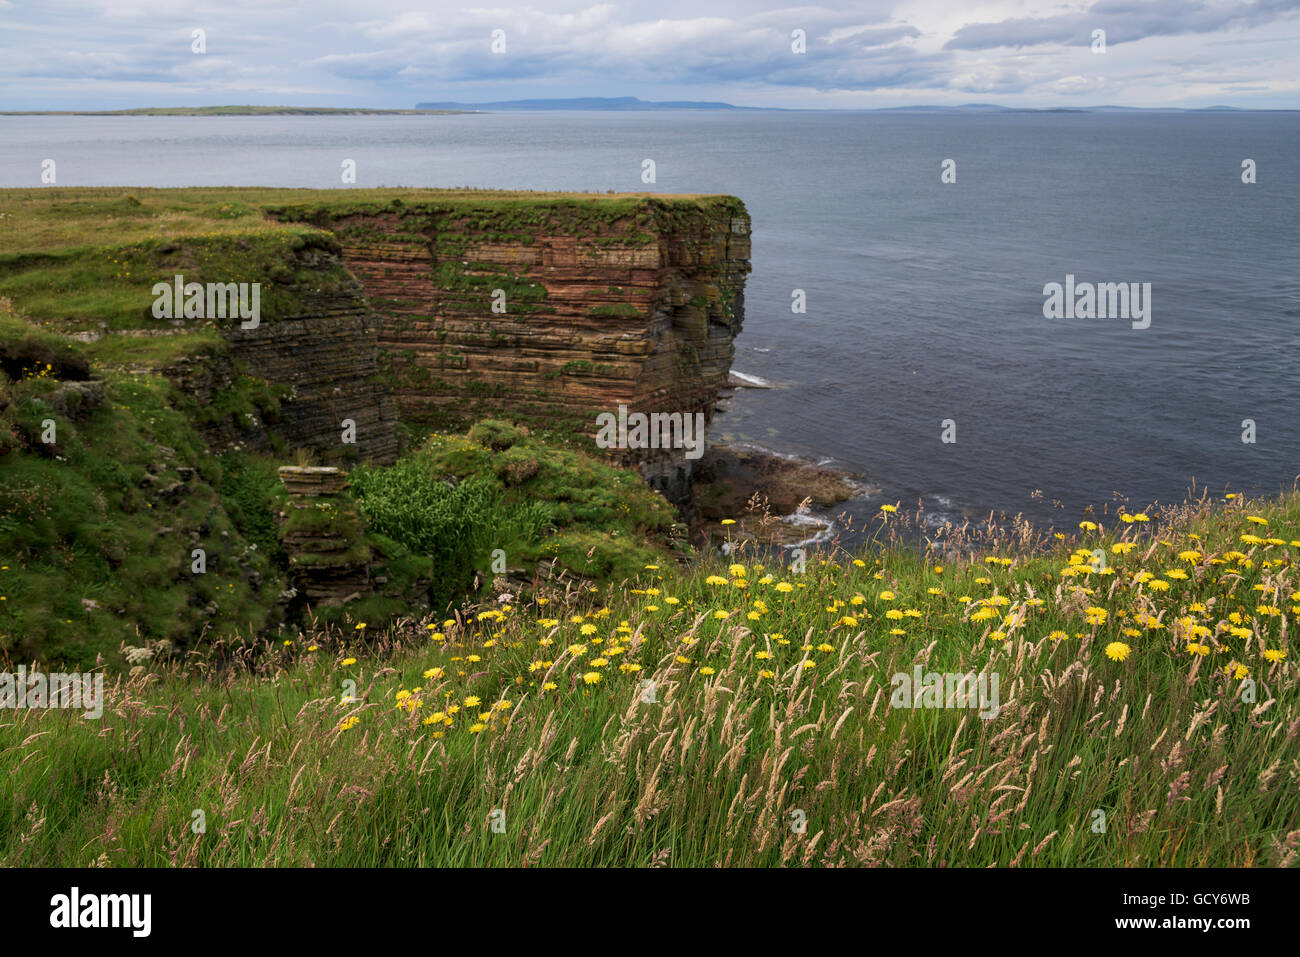 Yellow wildflowers blossom in the grass and cliffs along the coastline; John O'Groats, Scotland Stock Photo